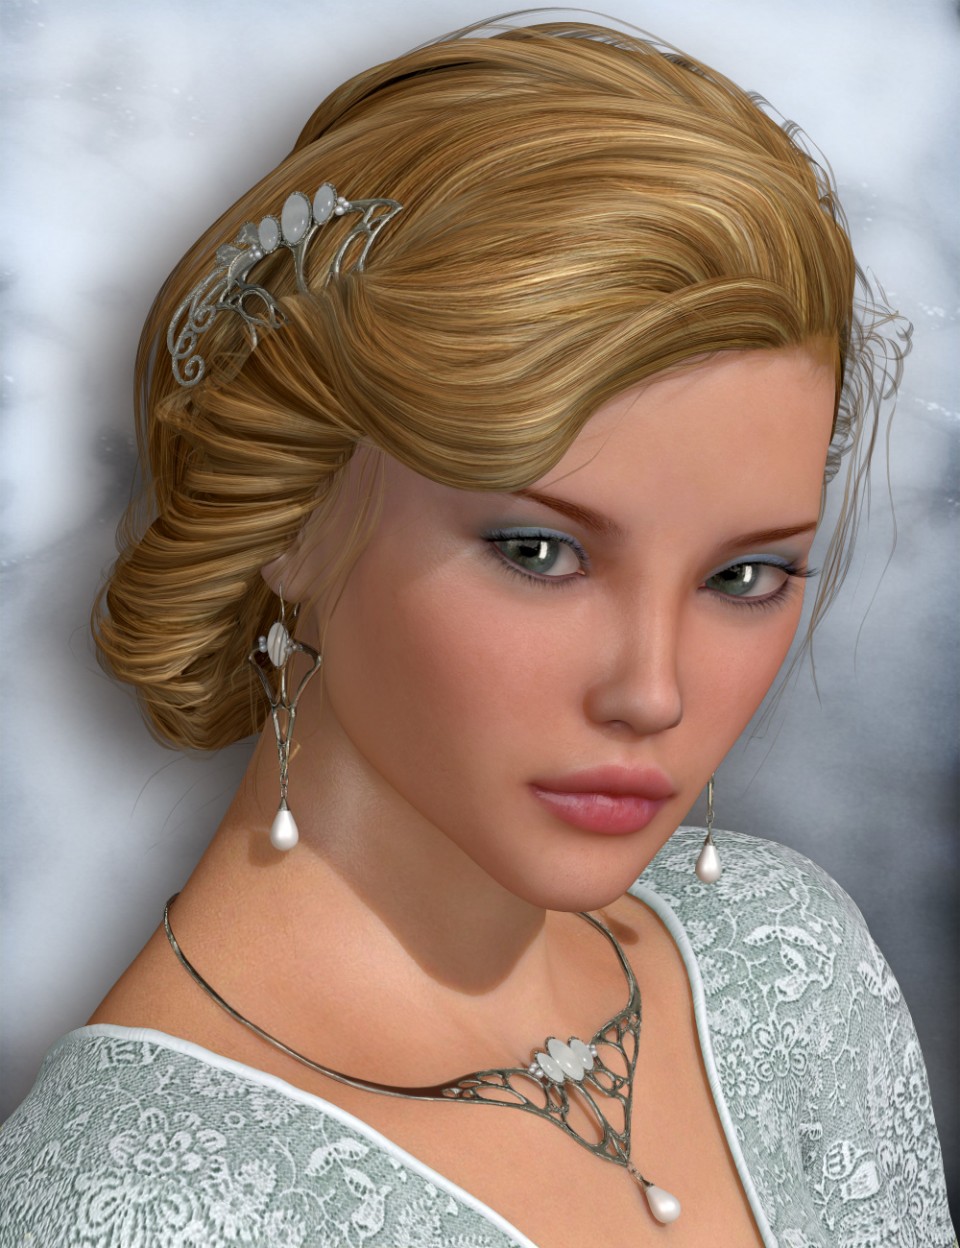 beautiful 3d poser girl collection